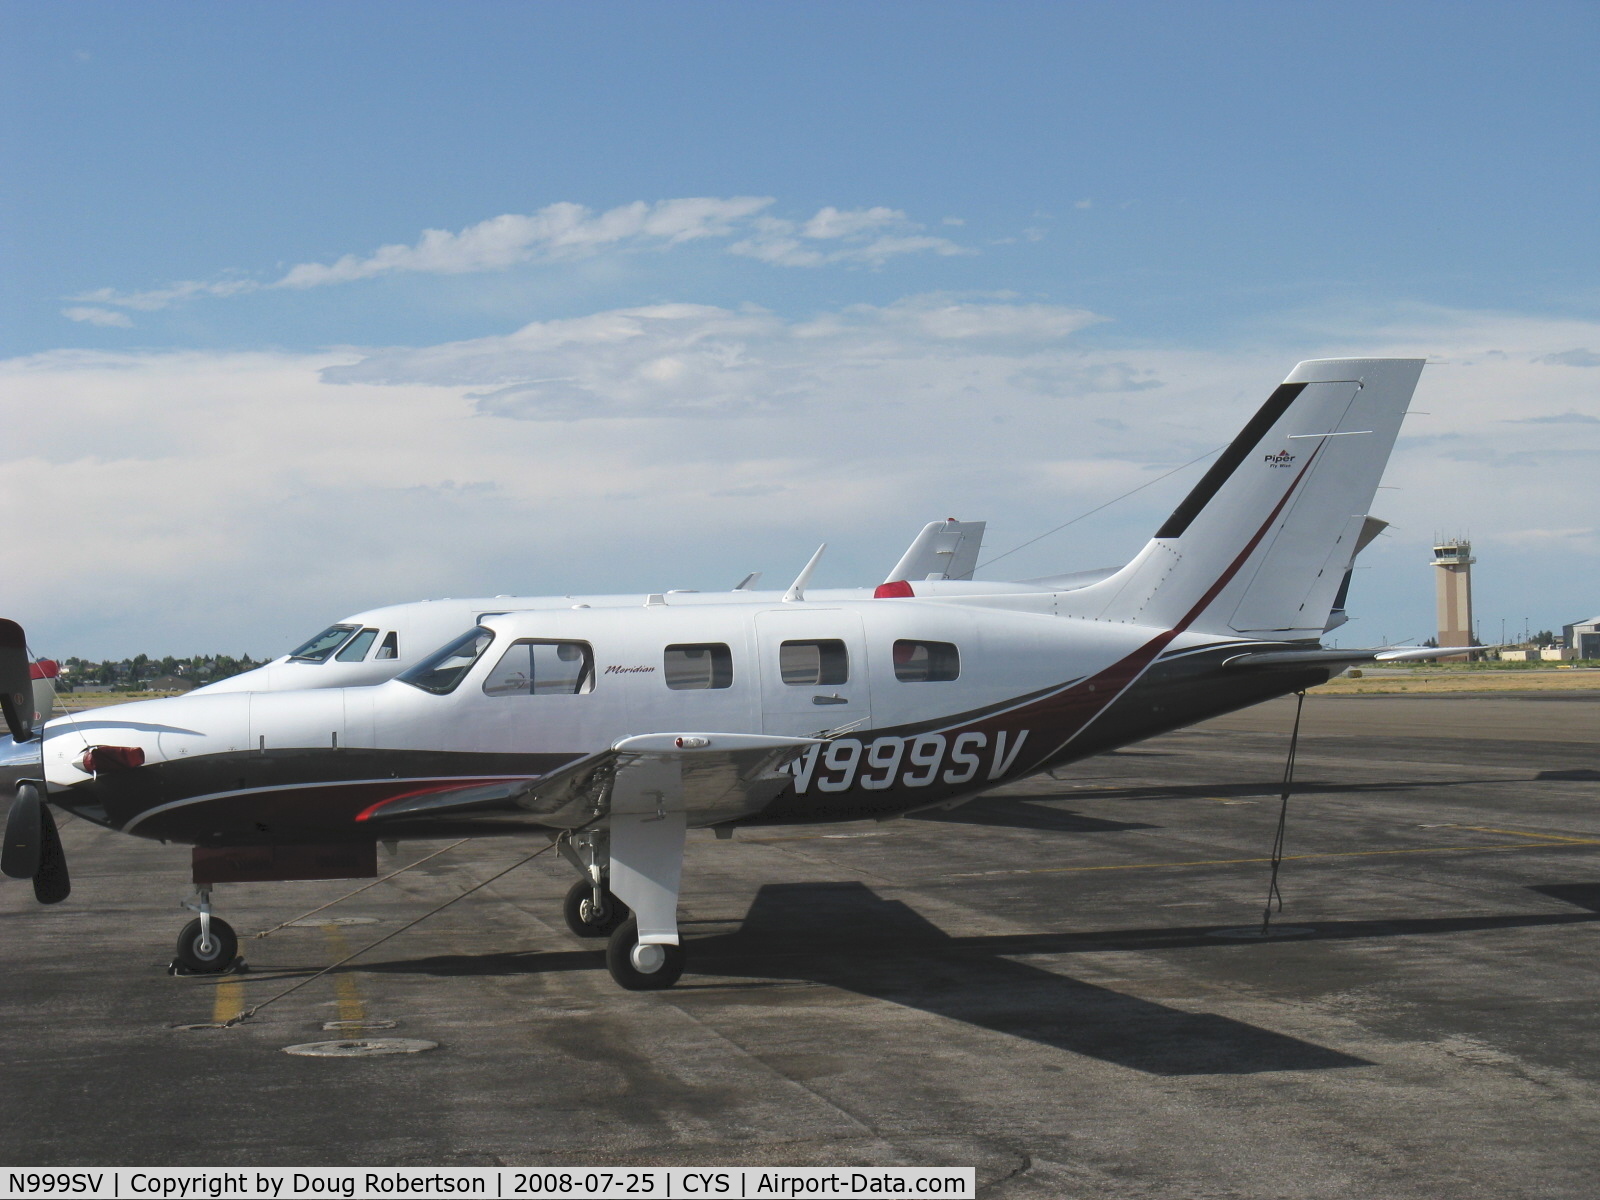 N999SV, 2008 Piper PA-46-500TP Meridian C/N 4697352, 2008 Piper PA-46-500TP MALIBU MERIDIAN, P&W(C) PT6A-42A turboprop 1.029 shp flat rated at 500 shp max continuous